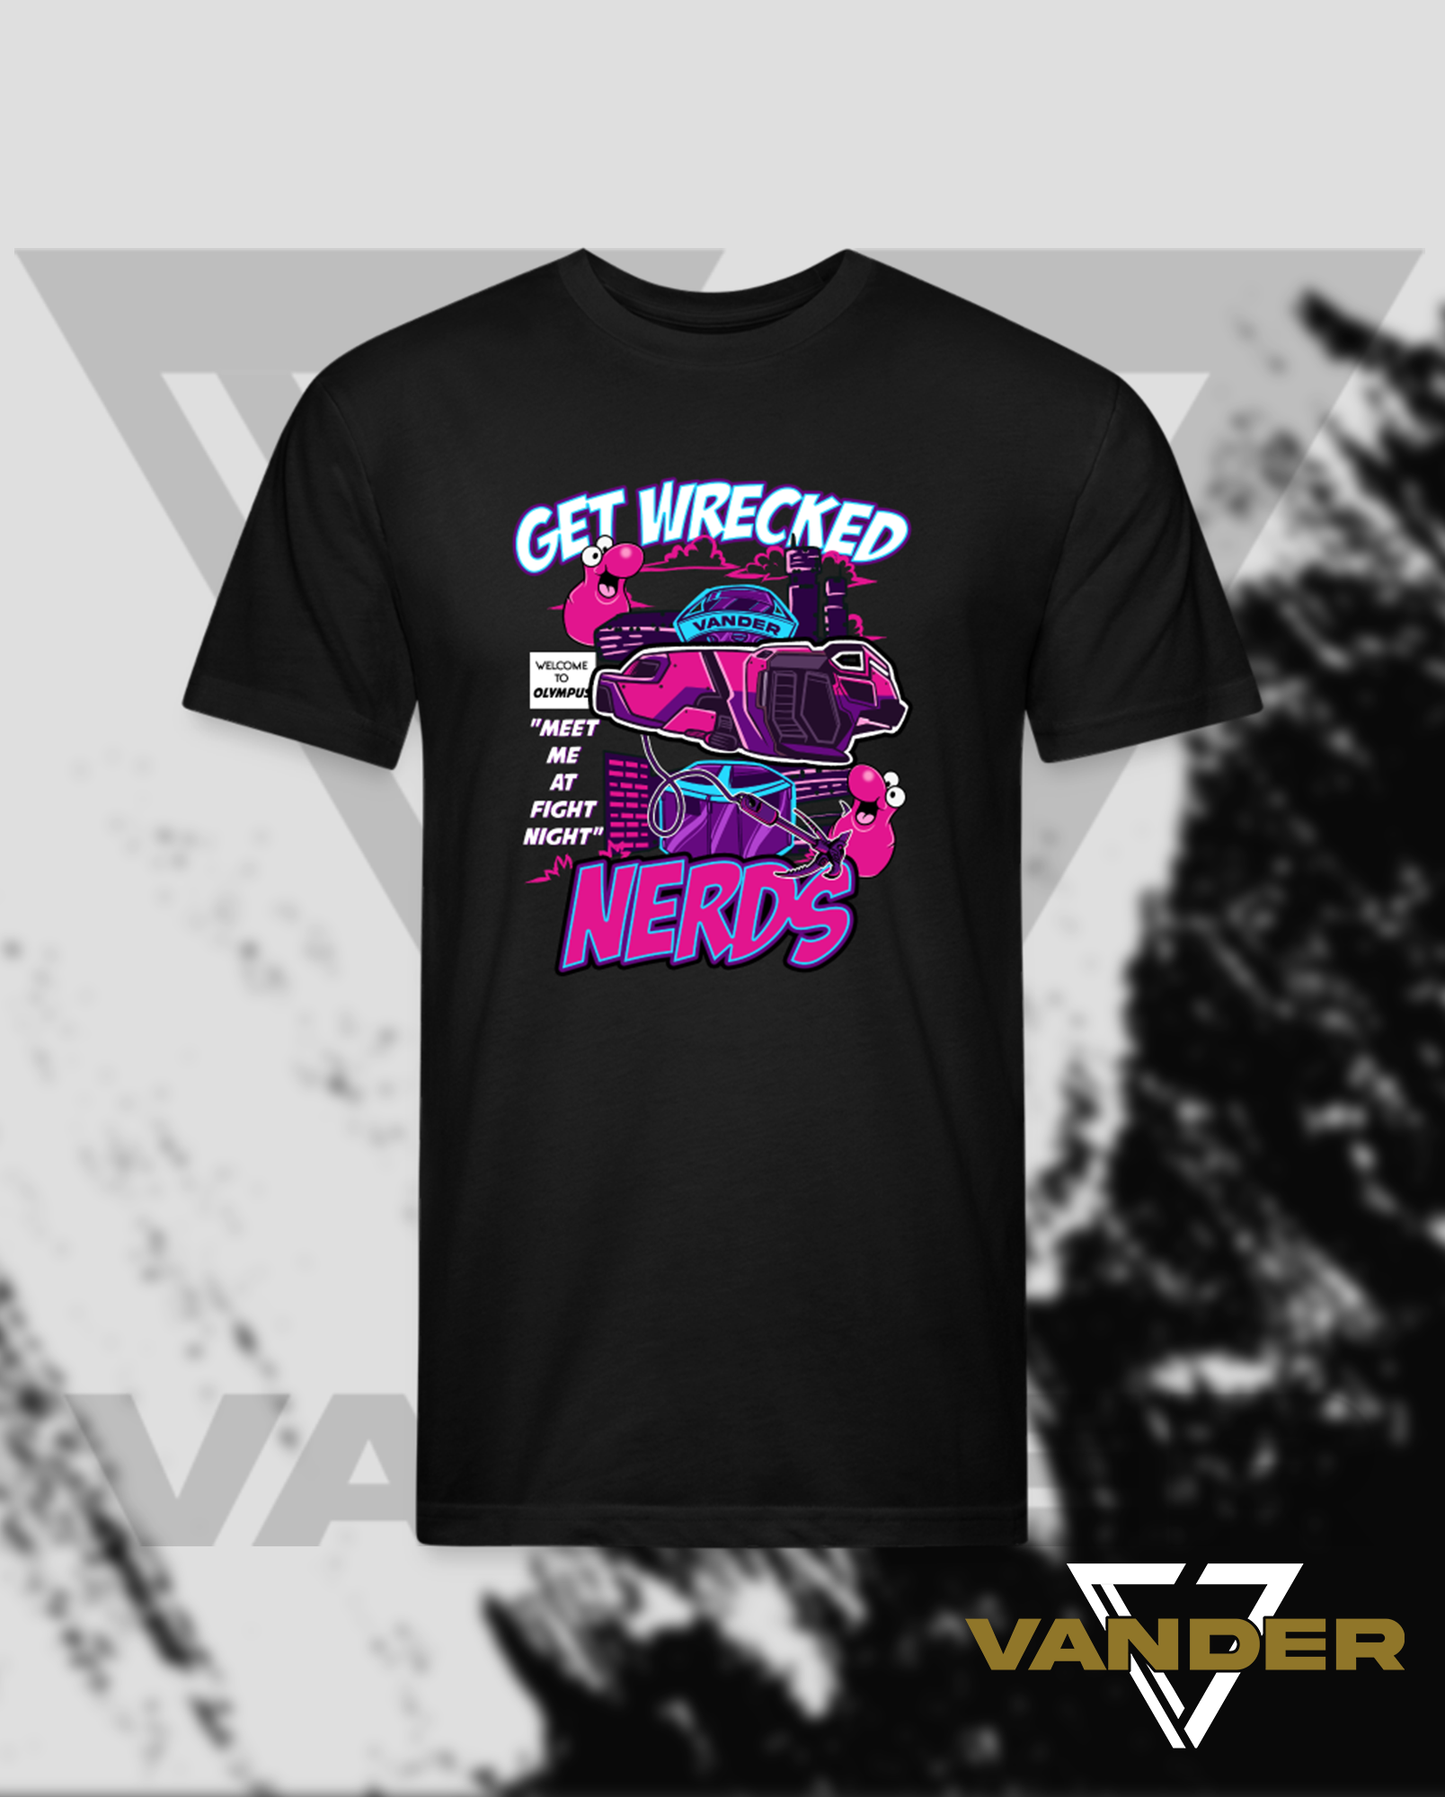 Vander ‘Get Wrecked Nerds’ Graphic Tee Shirt - Fitted